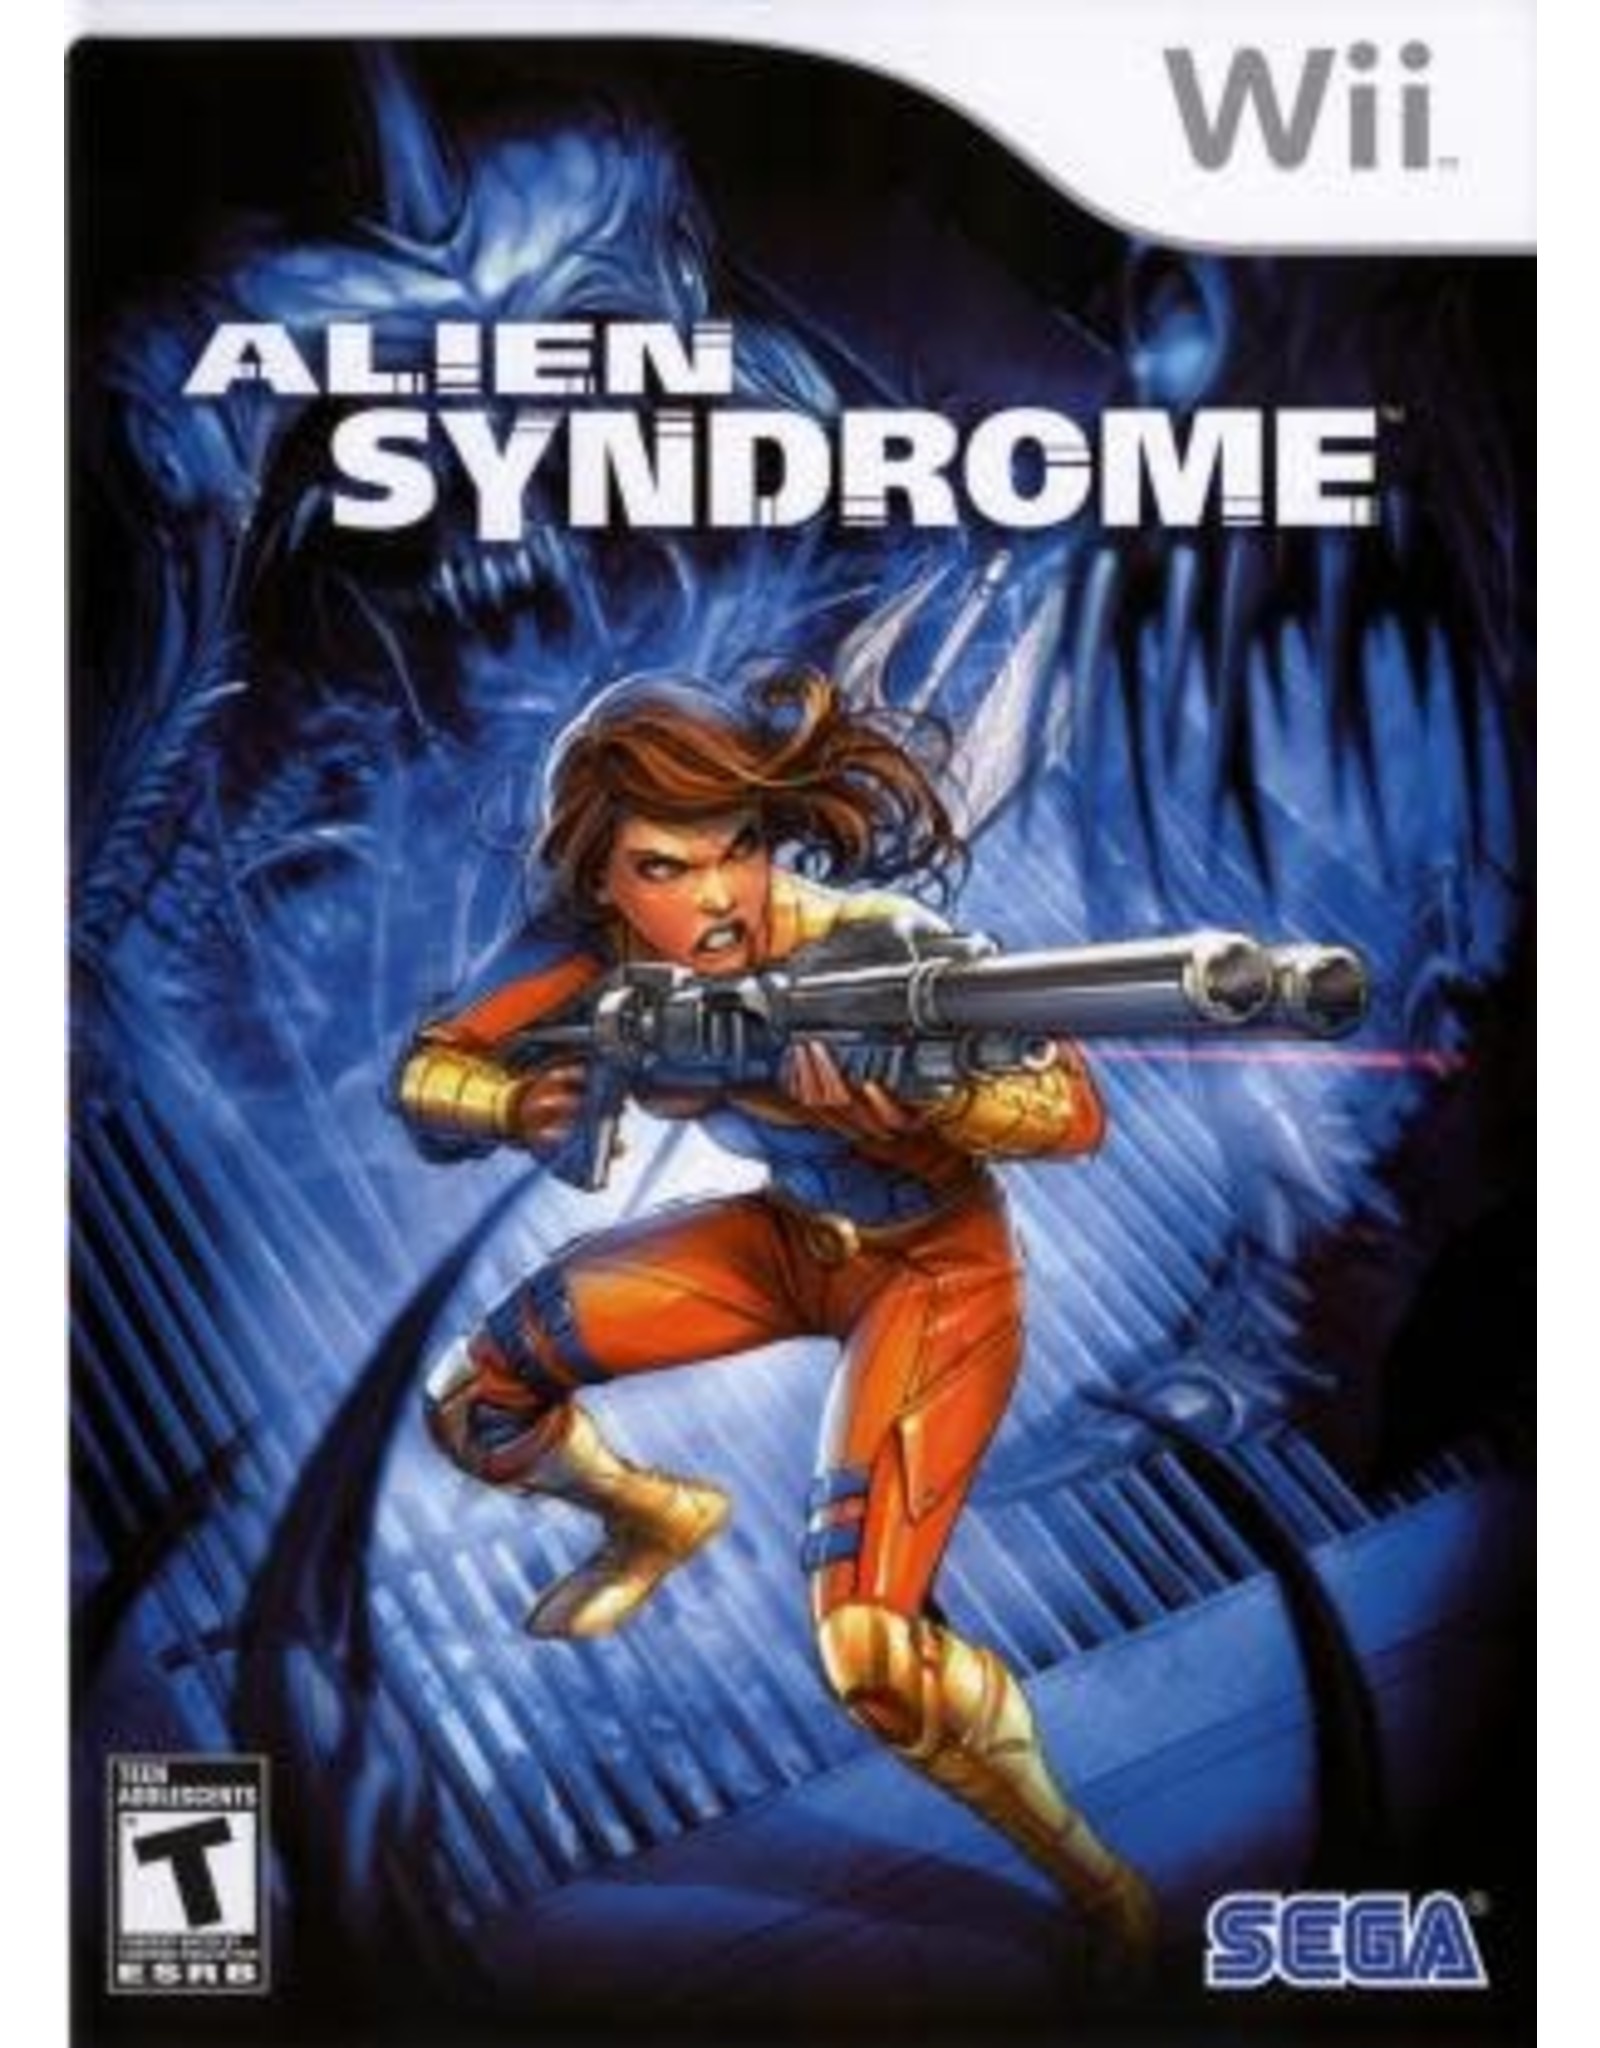 Wii Alien Syndrome (No Manual)